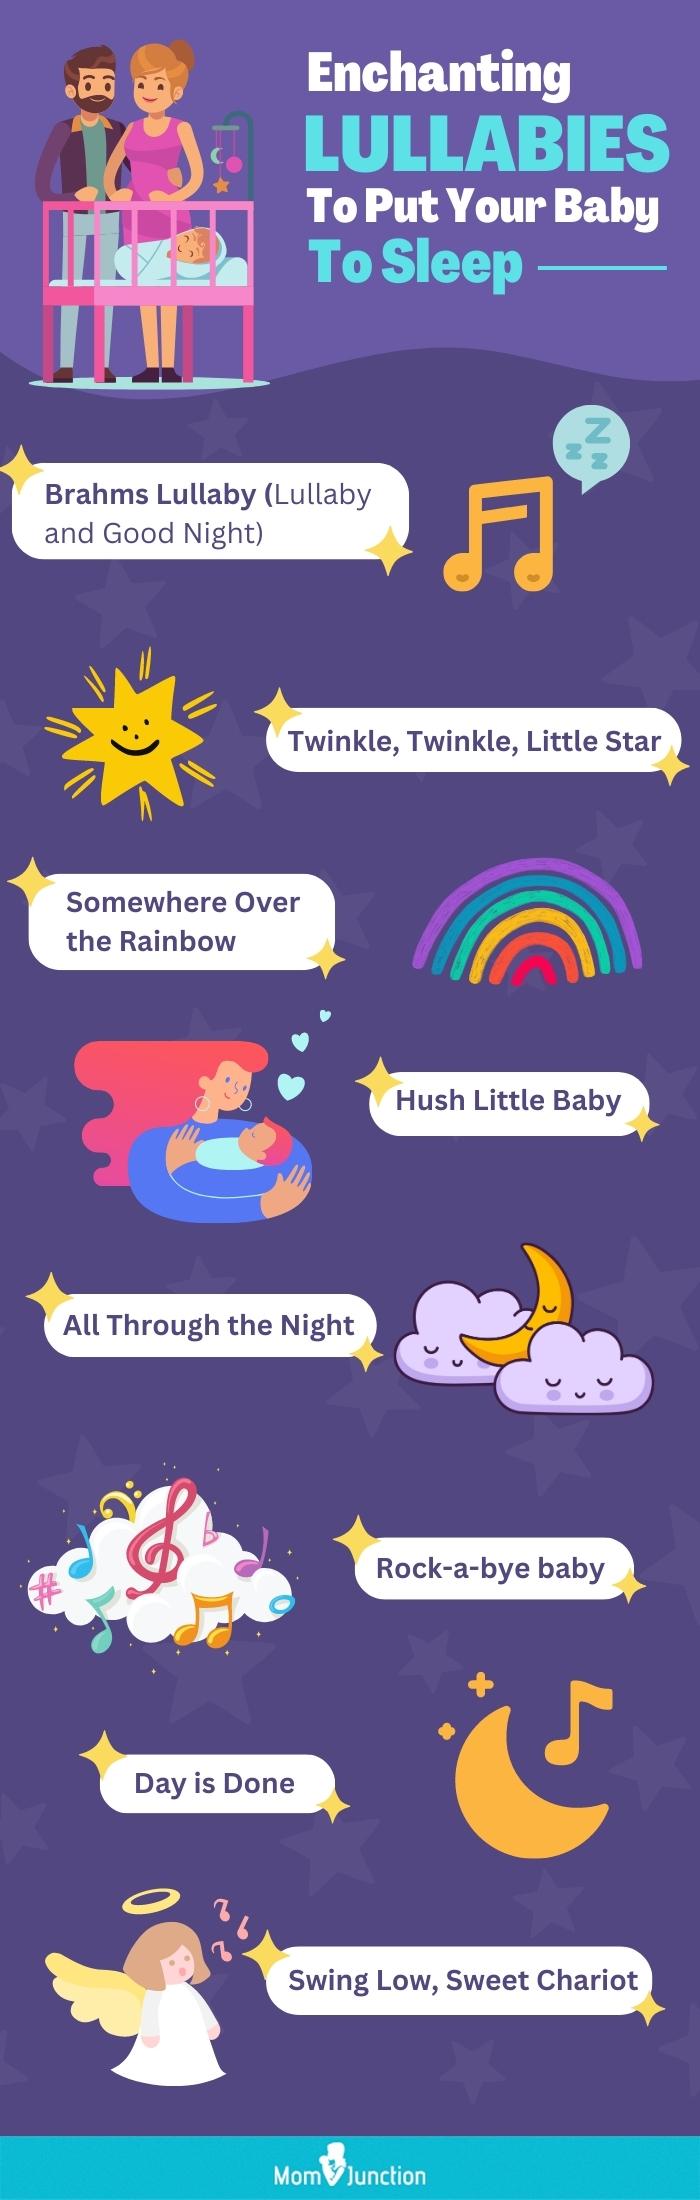 enchanting lullabies to put your baby to sleep(infographic)